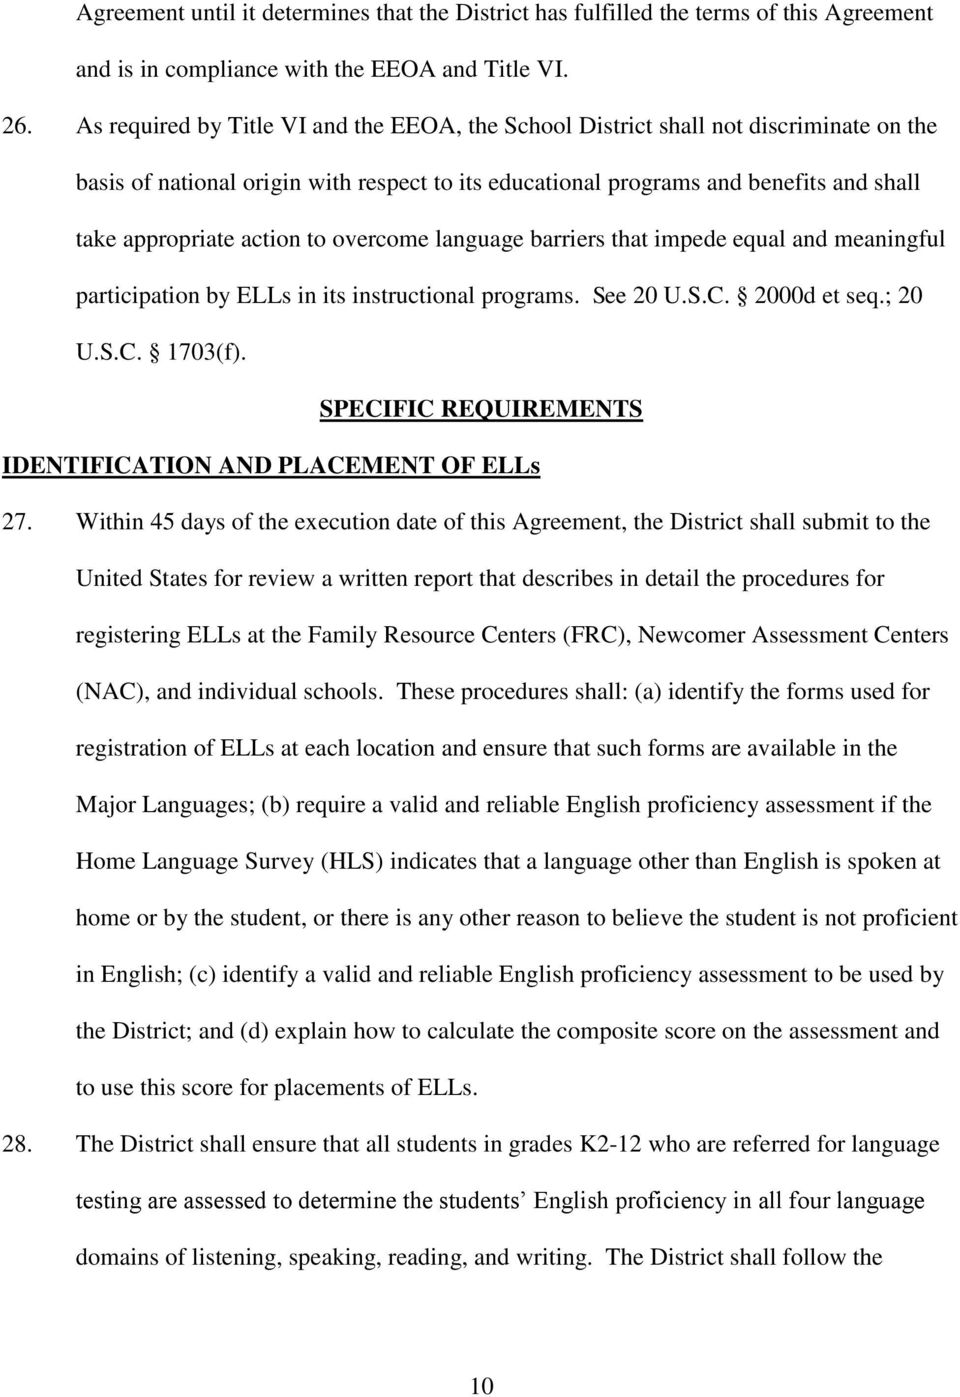 action to overcome language barriers that impede equal and meaningful participation by ELLs in its instructional programs. See 20 U.S.C. 2000d et seq.; 20 U.S.C. 1703(f).